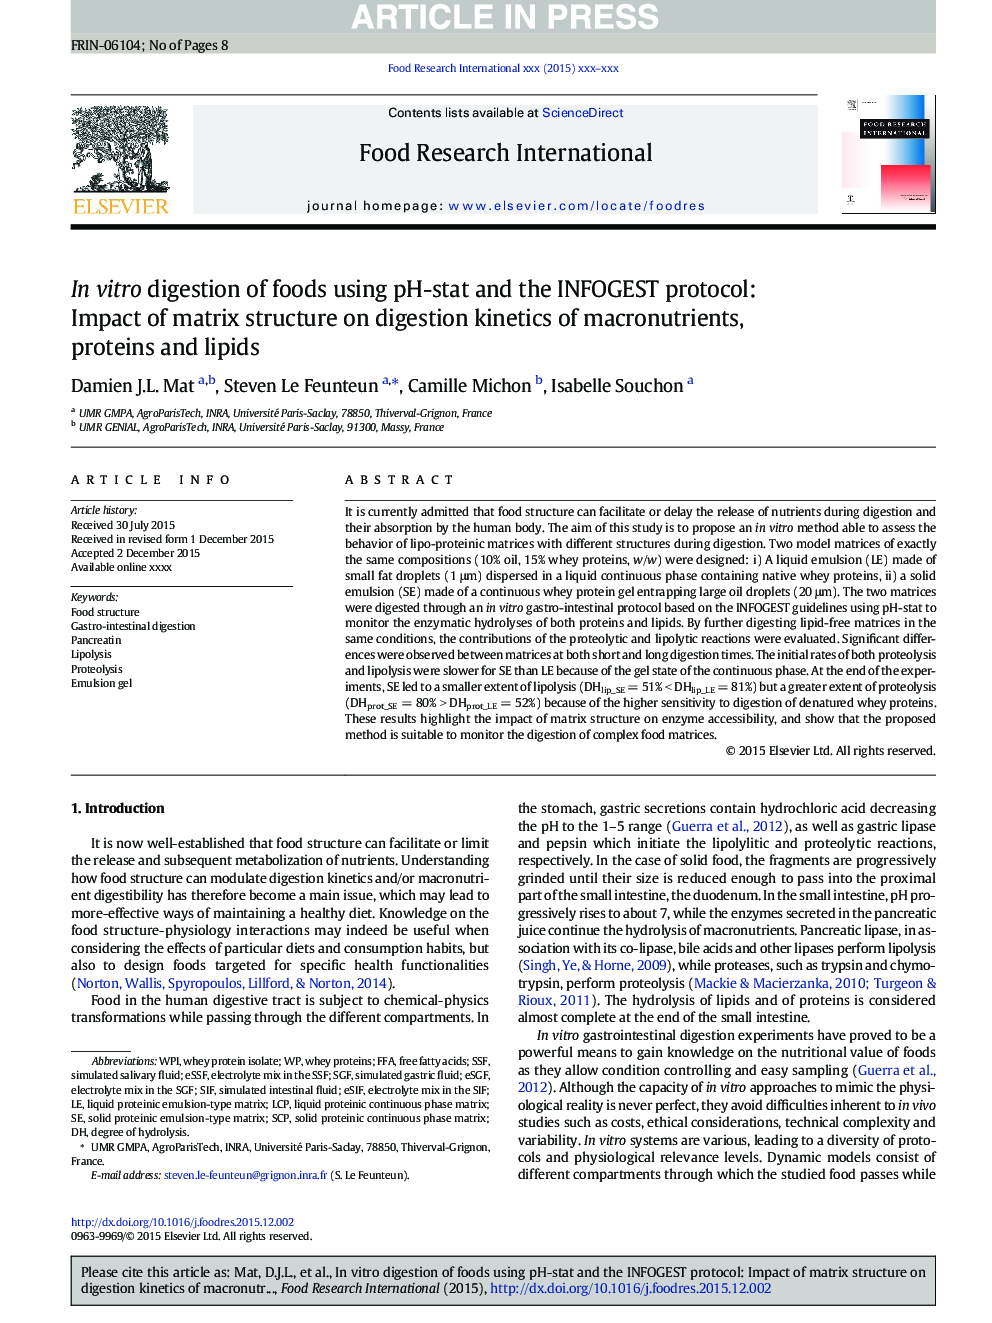 In vitro digestion of foods using pH-stat and the INFOGEST protocol: Impact of matrix structure on digestion kinetics of macronutrients, proteins and lipids